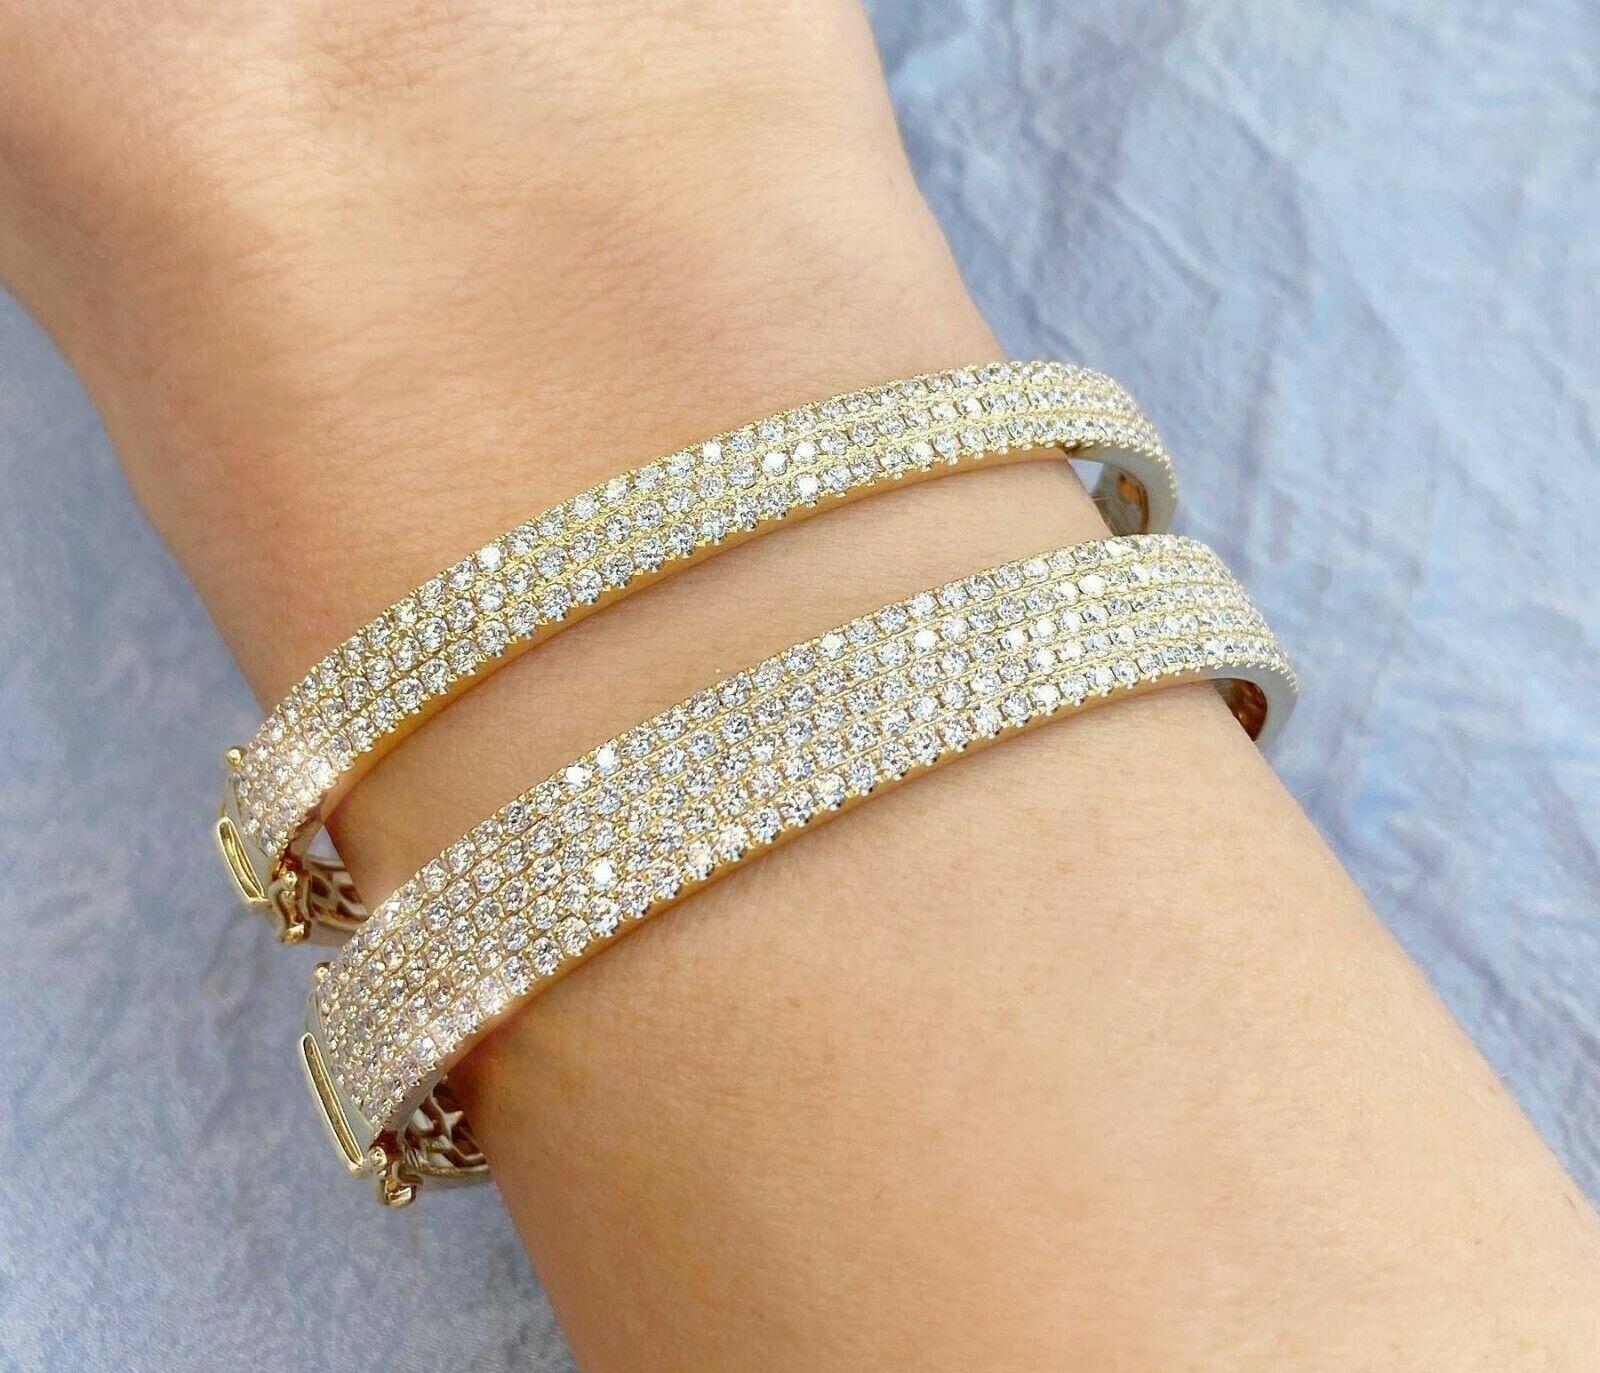 Diamond (2.35 total carat weight) bangle bracelet in 14k yellow gold. Perfect for an anniversary or valentine's day. The bracelet is designed and handmade locally in Los Angeles by Sage Designs L.A. using earth-mined and conflict free diamonds. 6.5